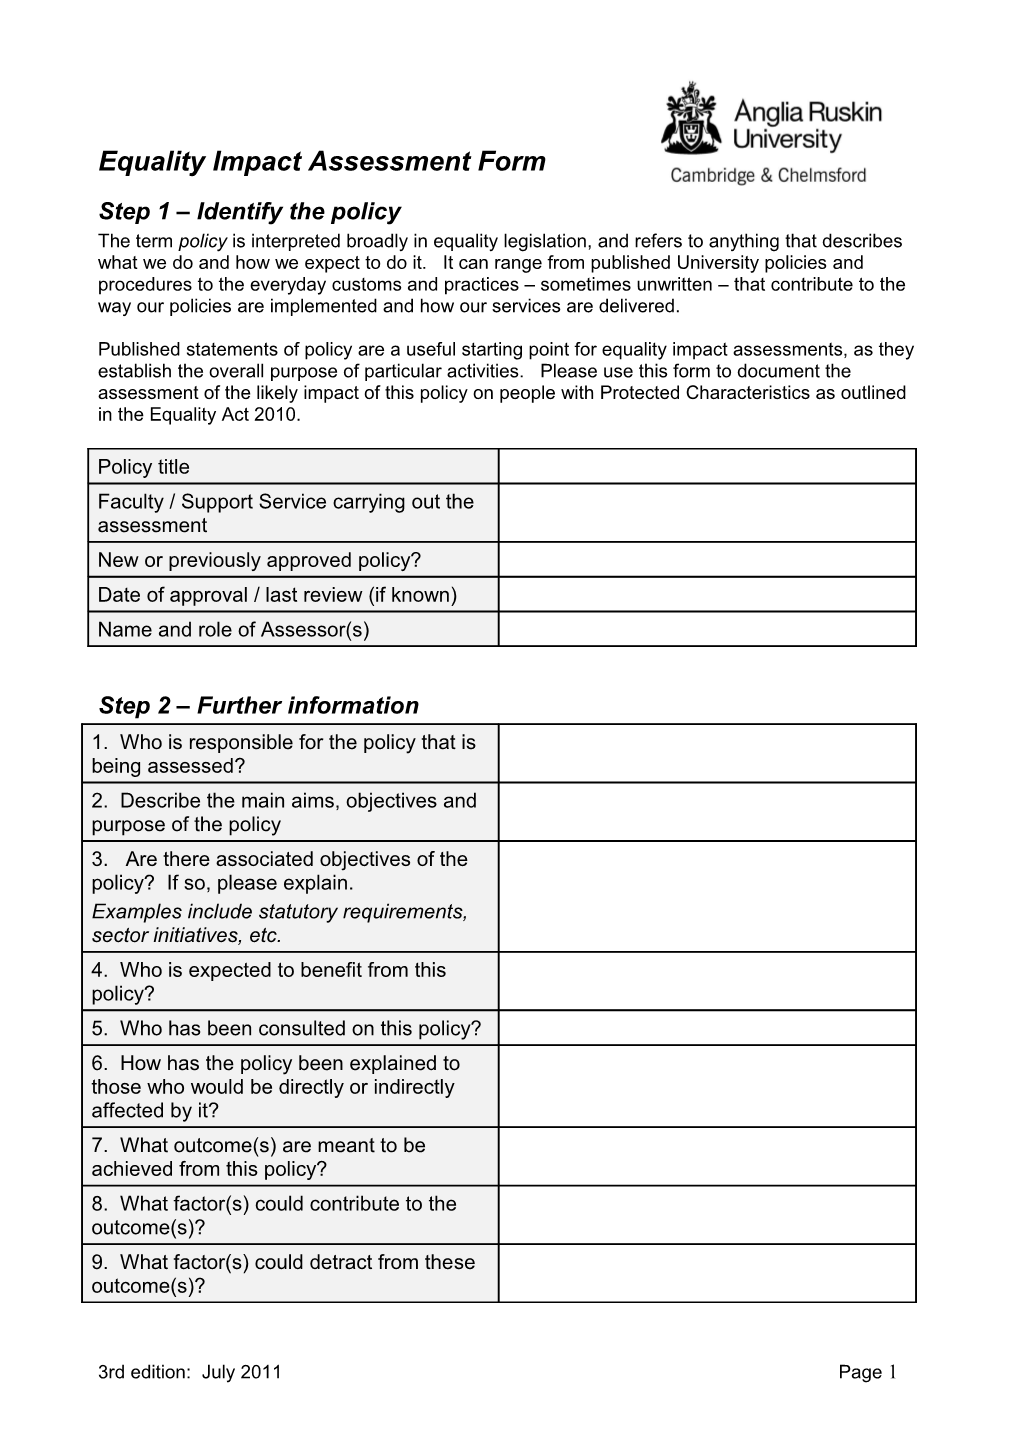 Equality Impact Assessment Form s3